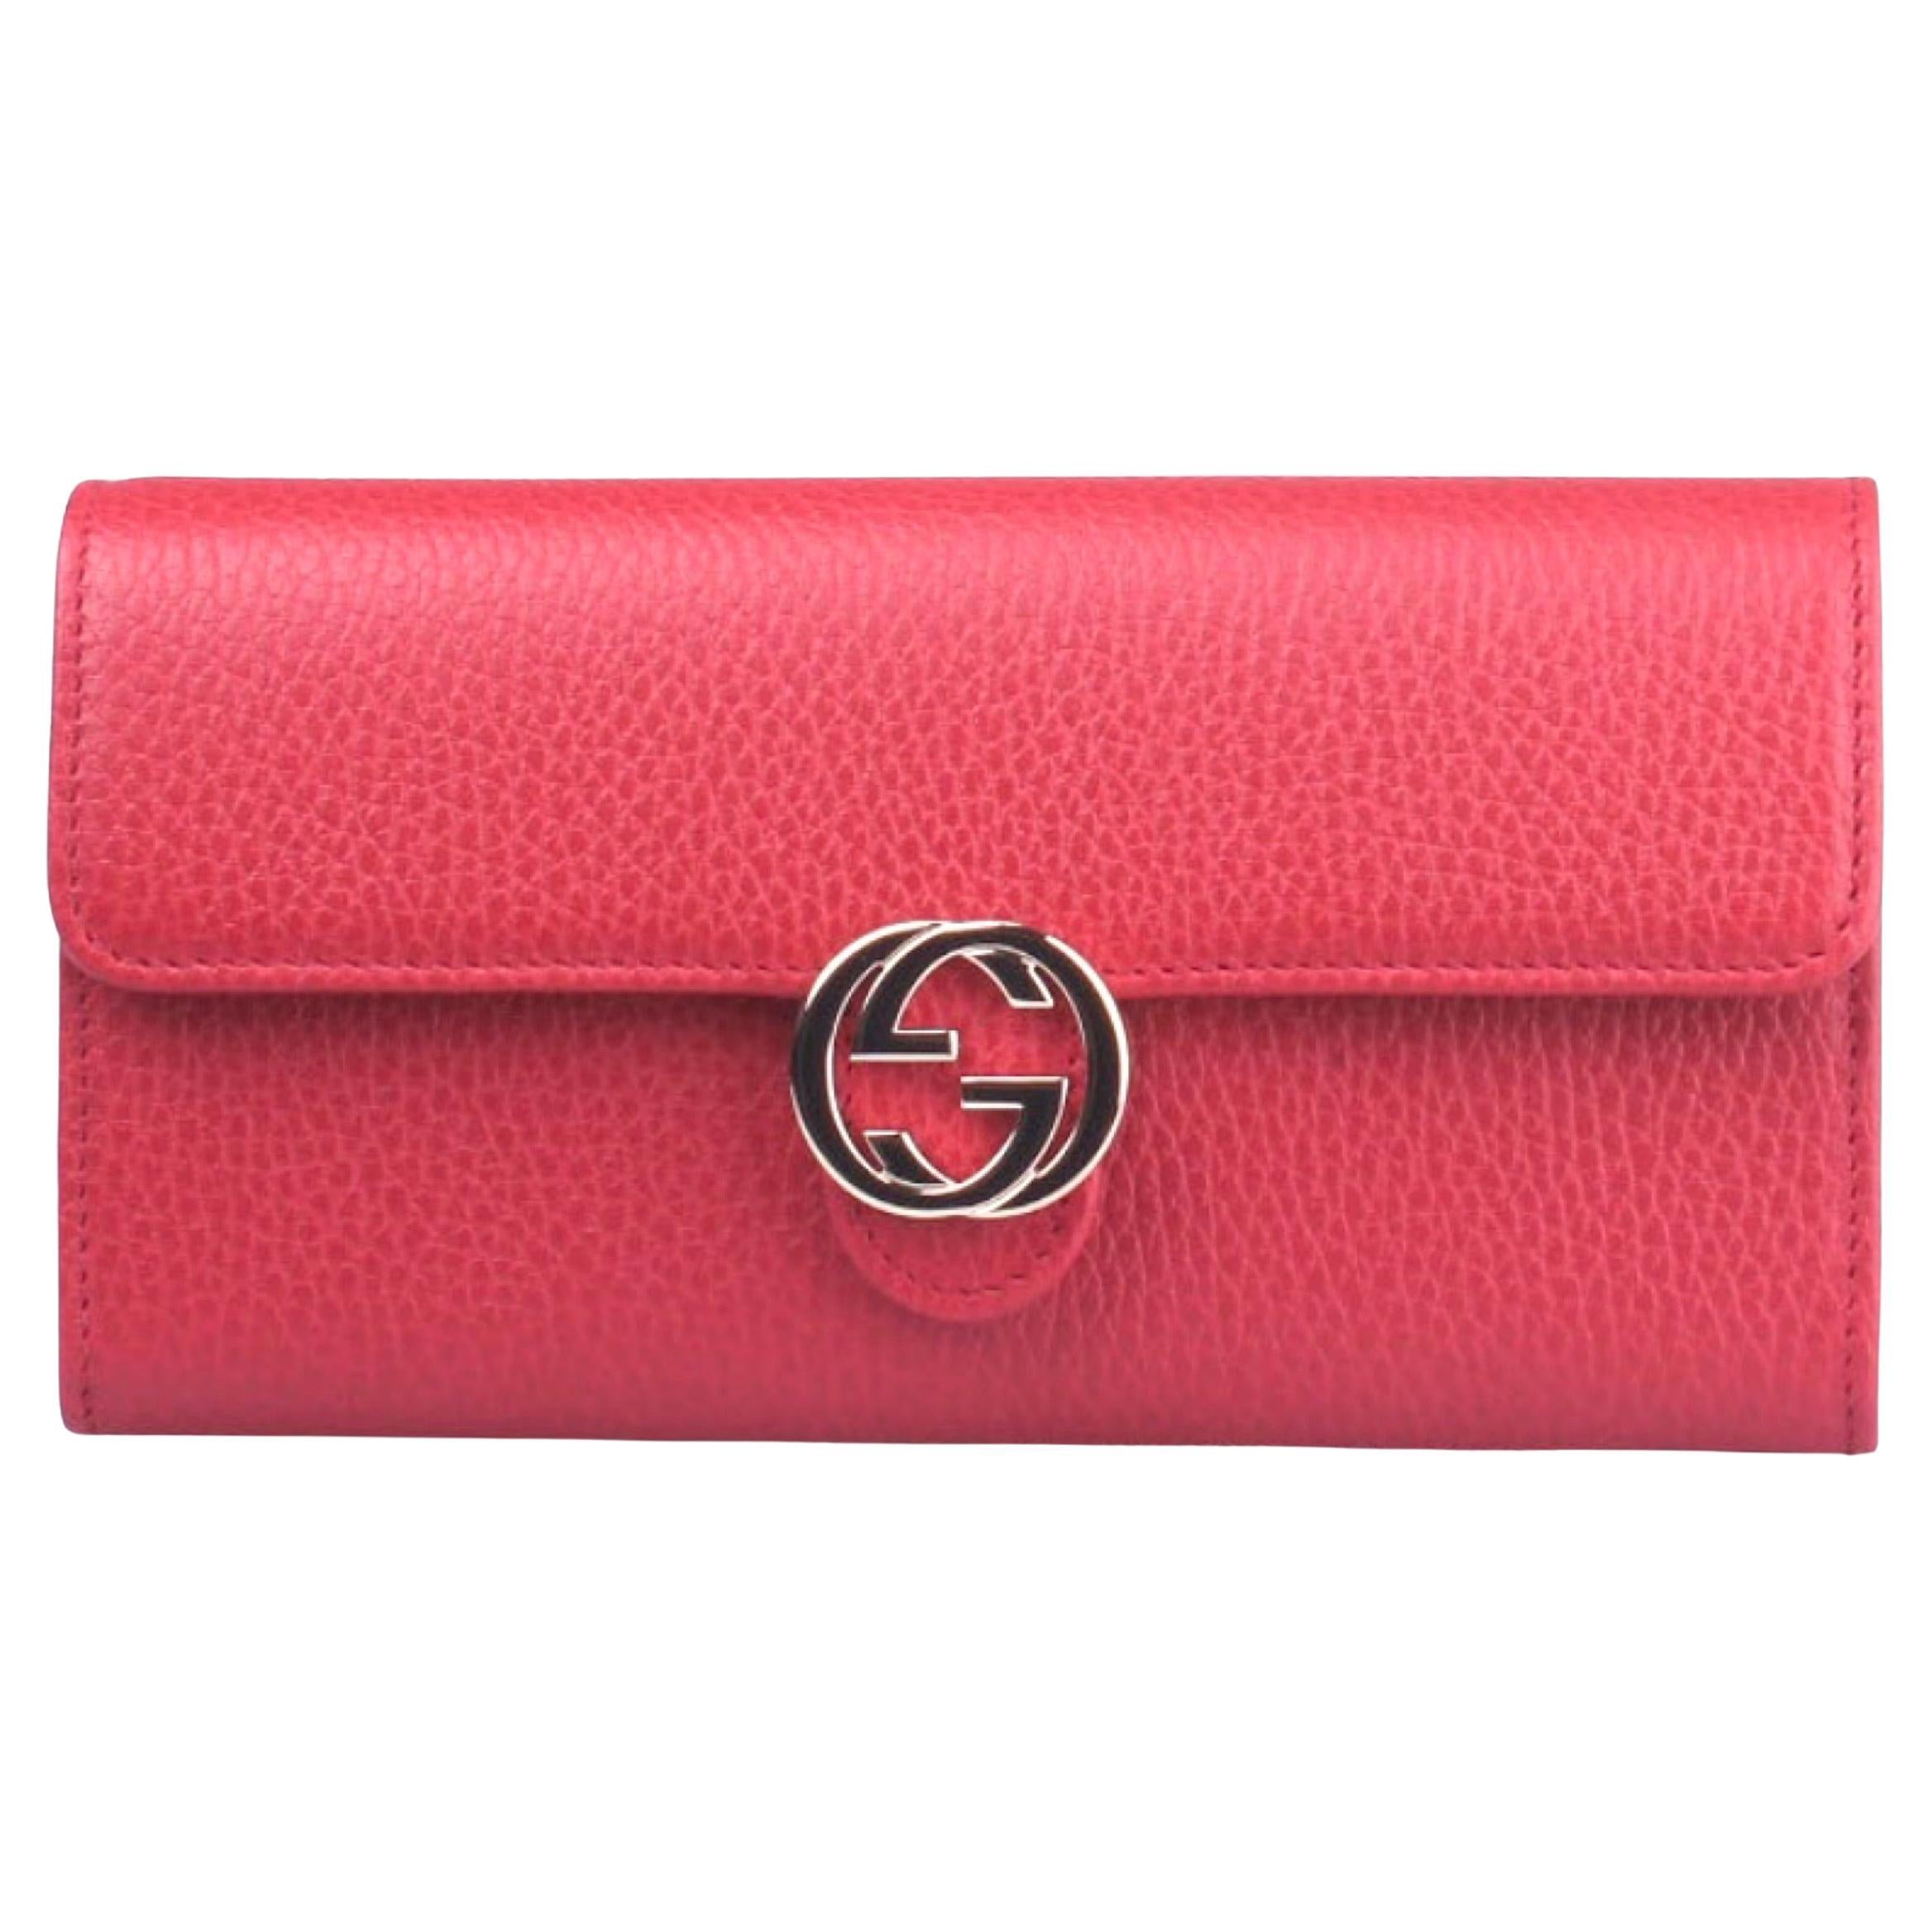 NEW Gucci Red Interlocking G Leather Long Wallet Clutch Bag For Sale